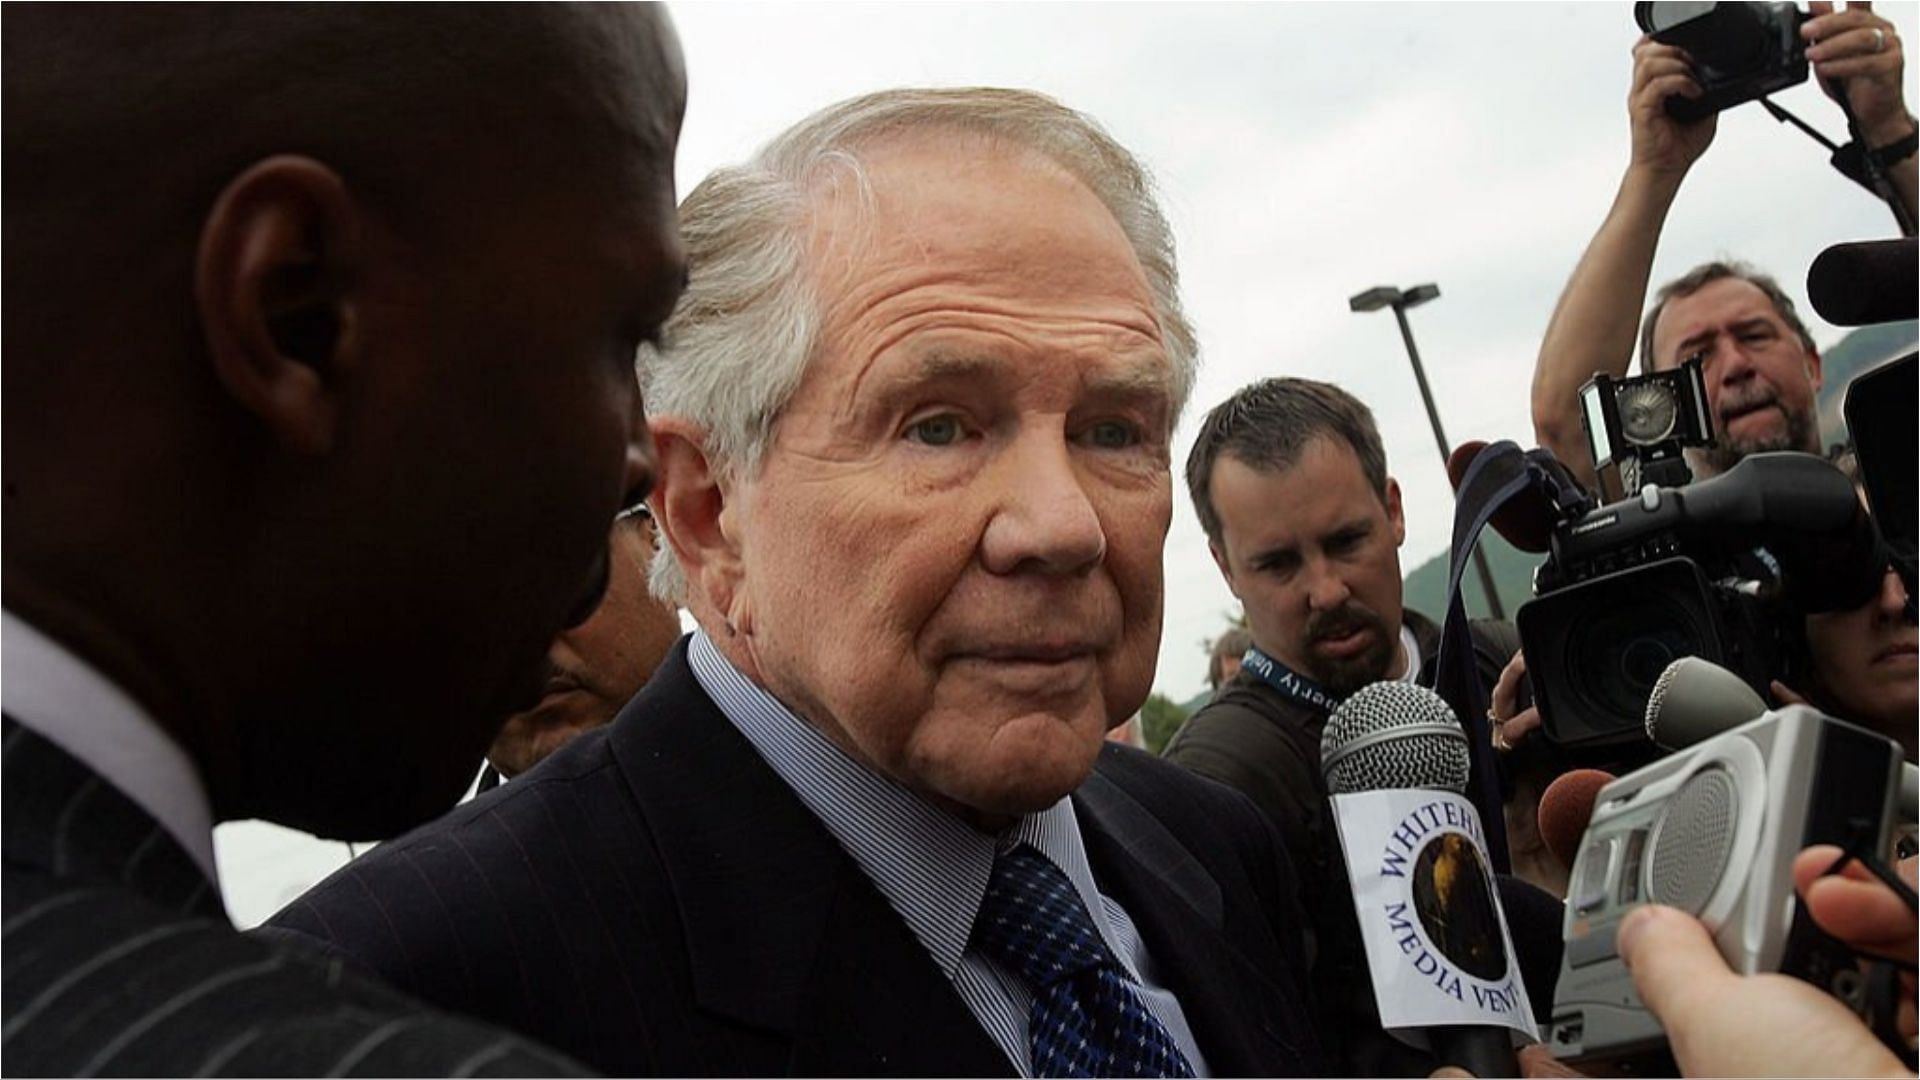 Pat Robertson recently died at the age of 93 (Image via Mario Tama/Getty Images)